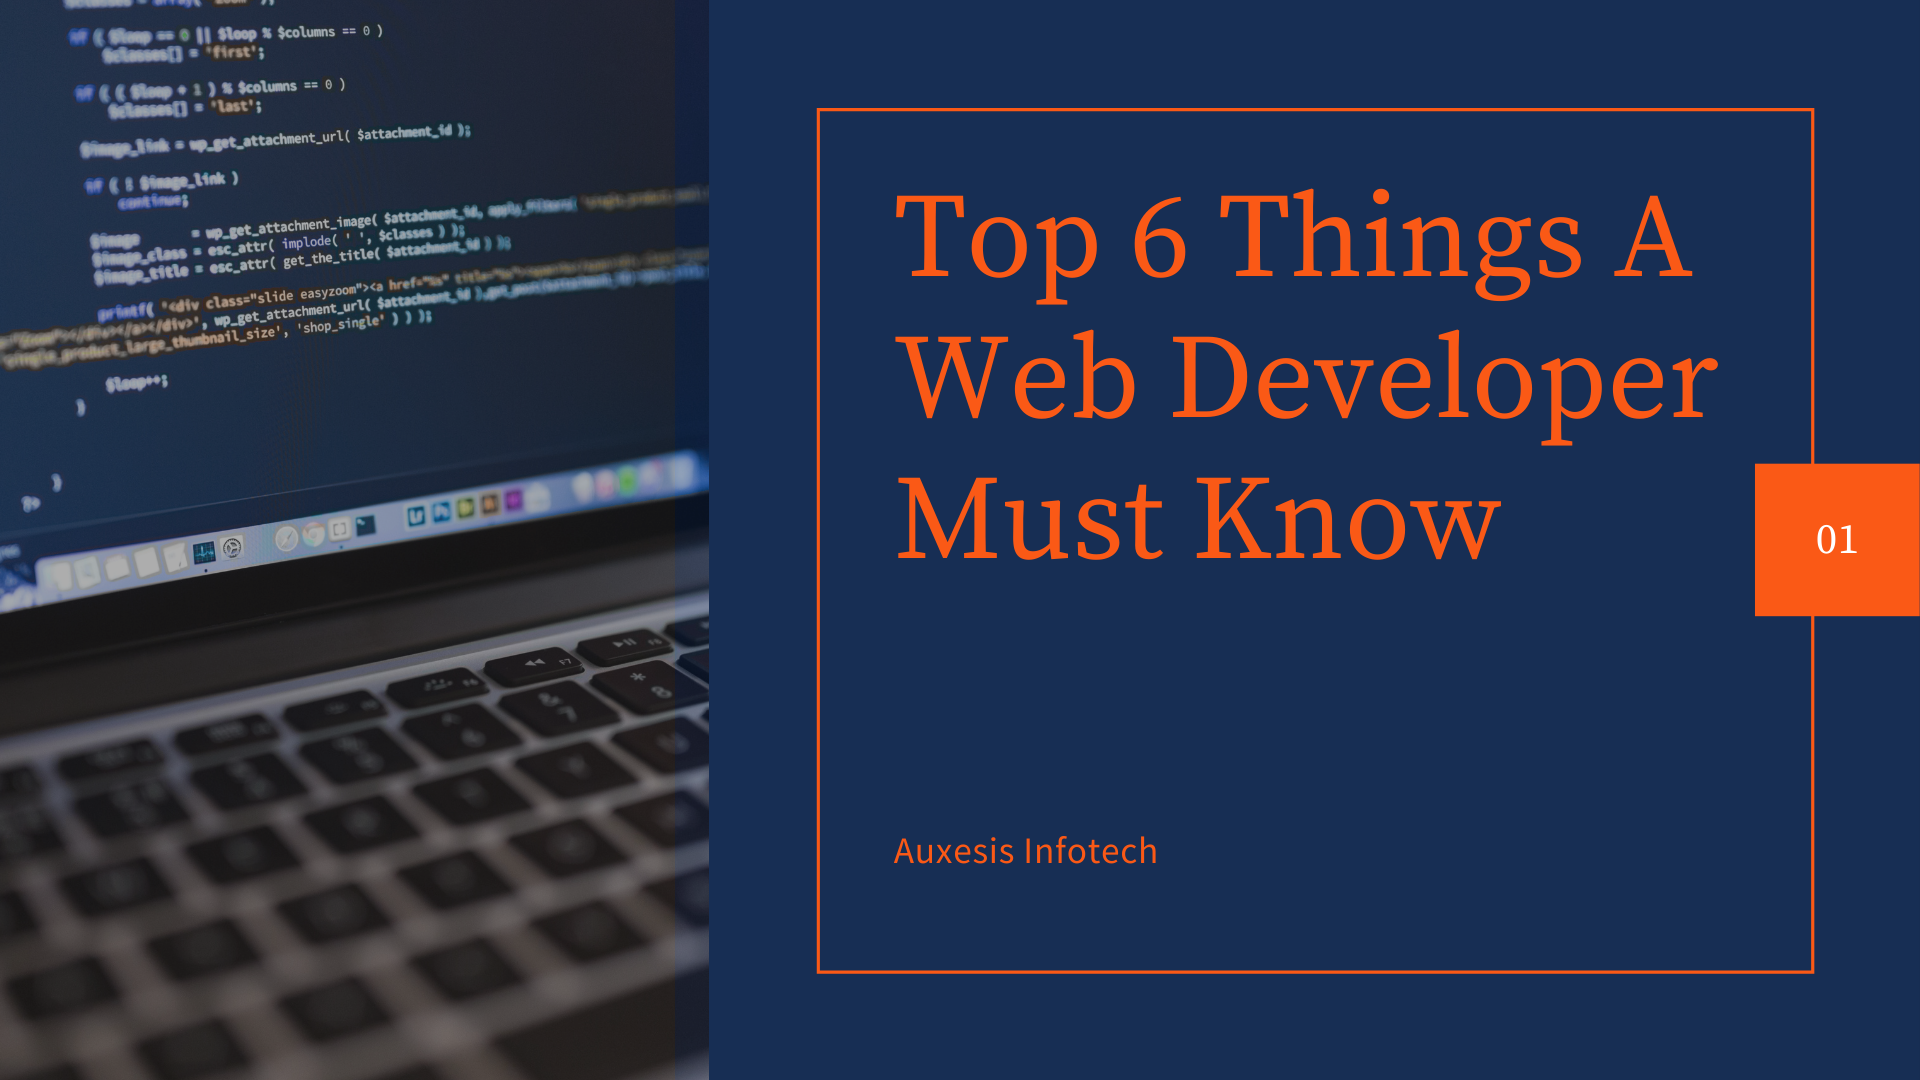 public/uploads/2021/01/Top-6-Things-A-Web-Developer-Must-Know.png